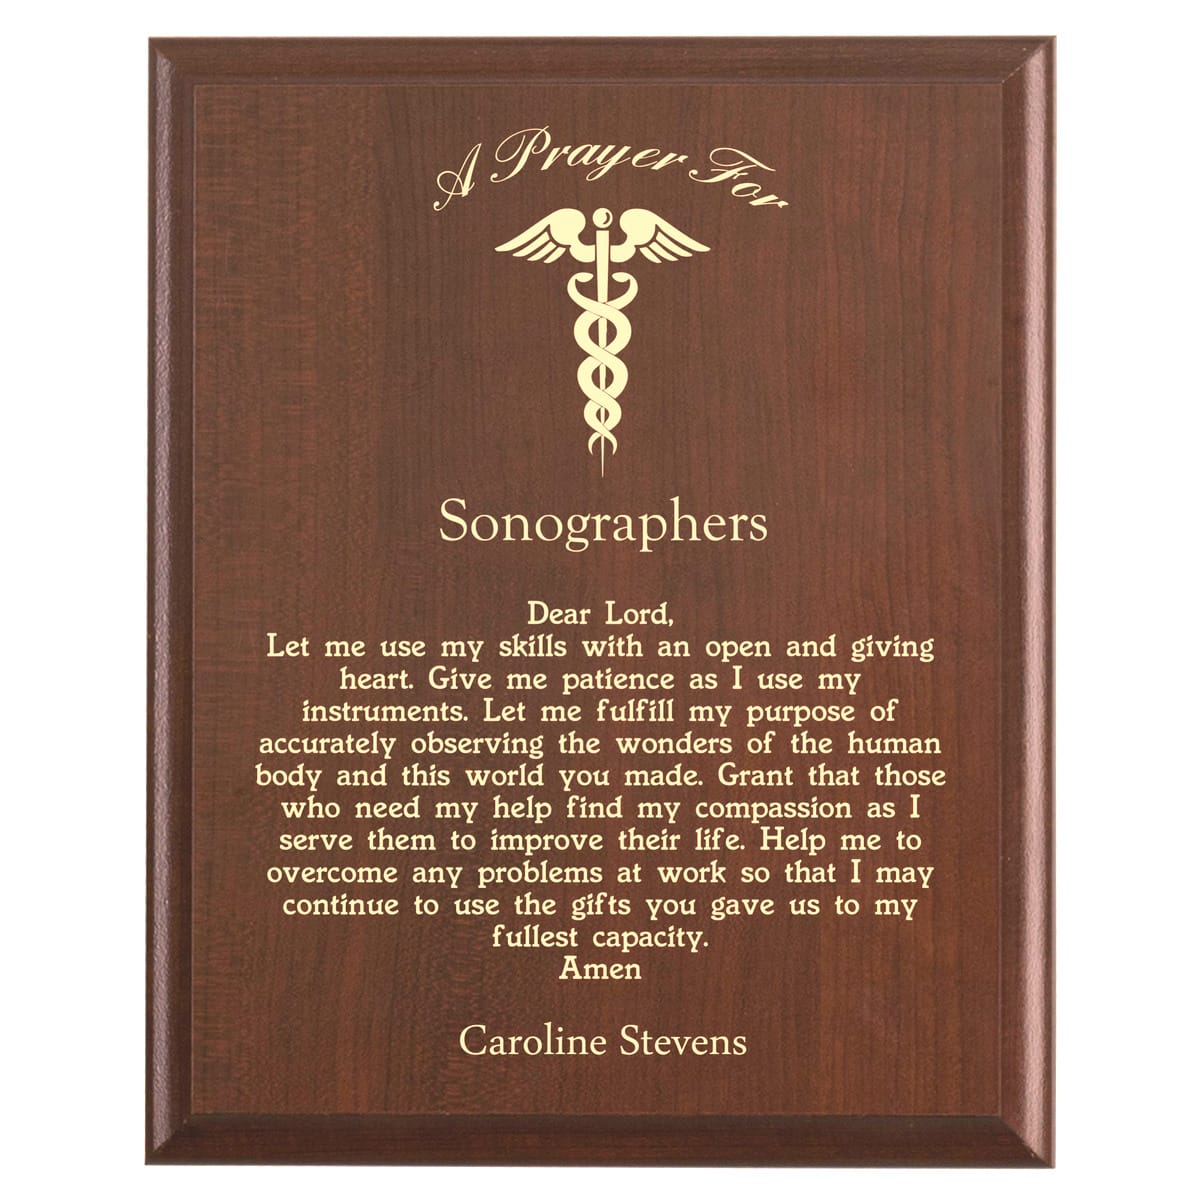 Plaque photo: Sonographer Prayer Plaque design with free personalization. Wood style finish with customized text.